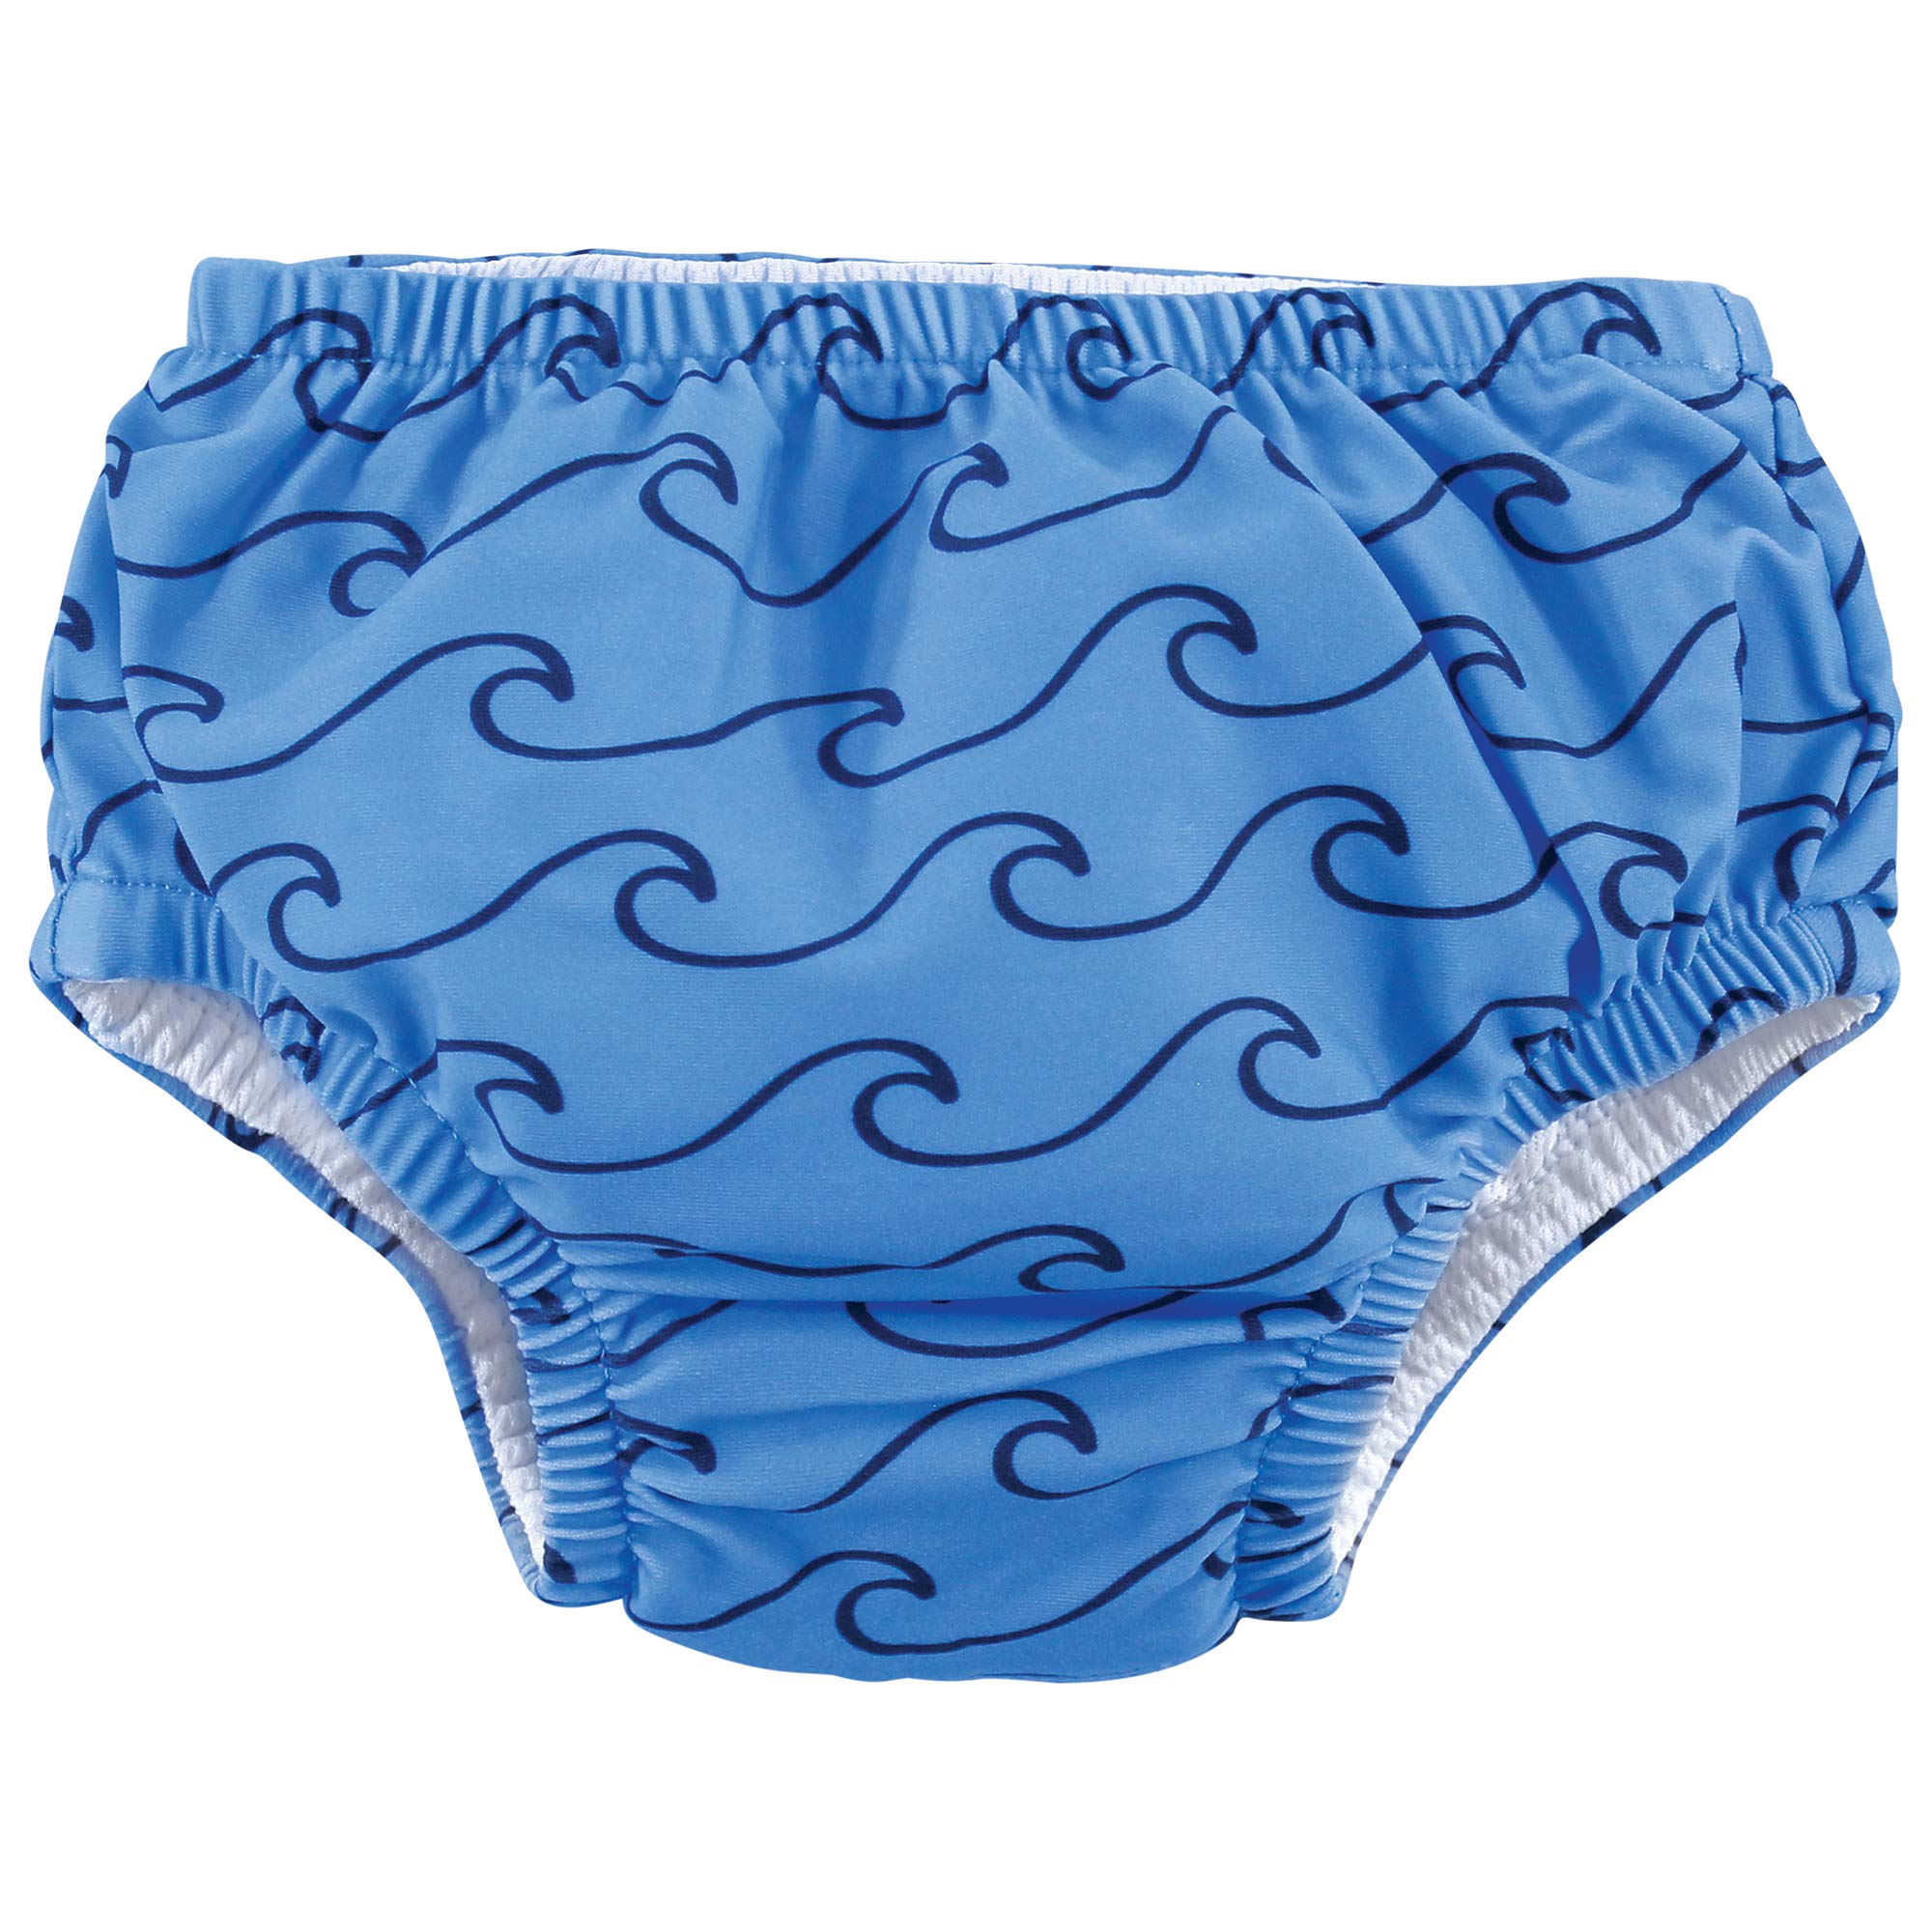 Hudson Baby Unisex Baby Swim Diapers, Sharks, 18-24 Months